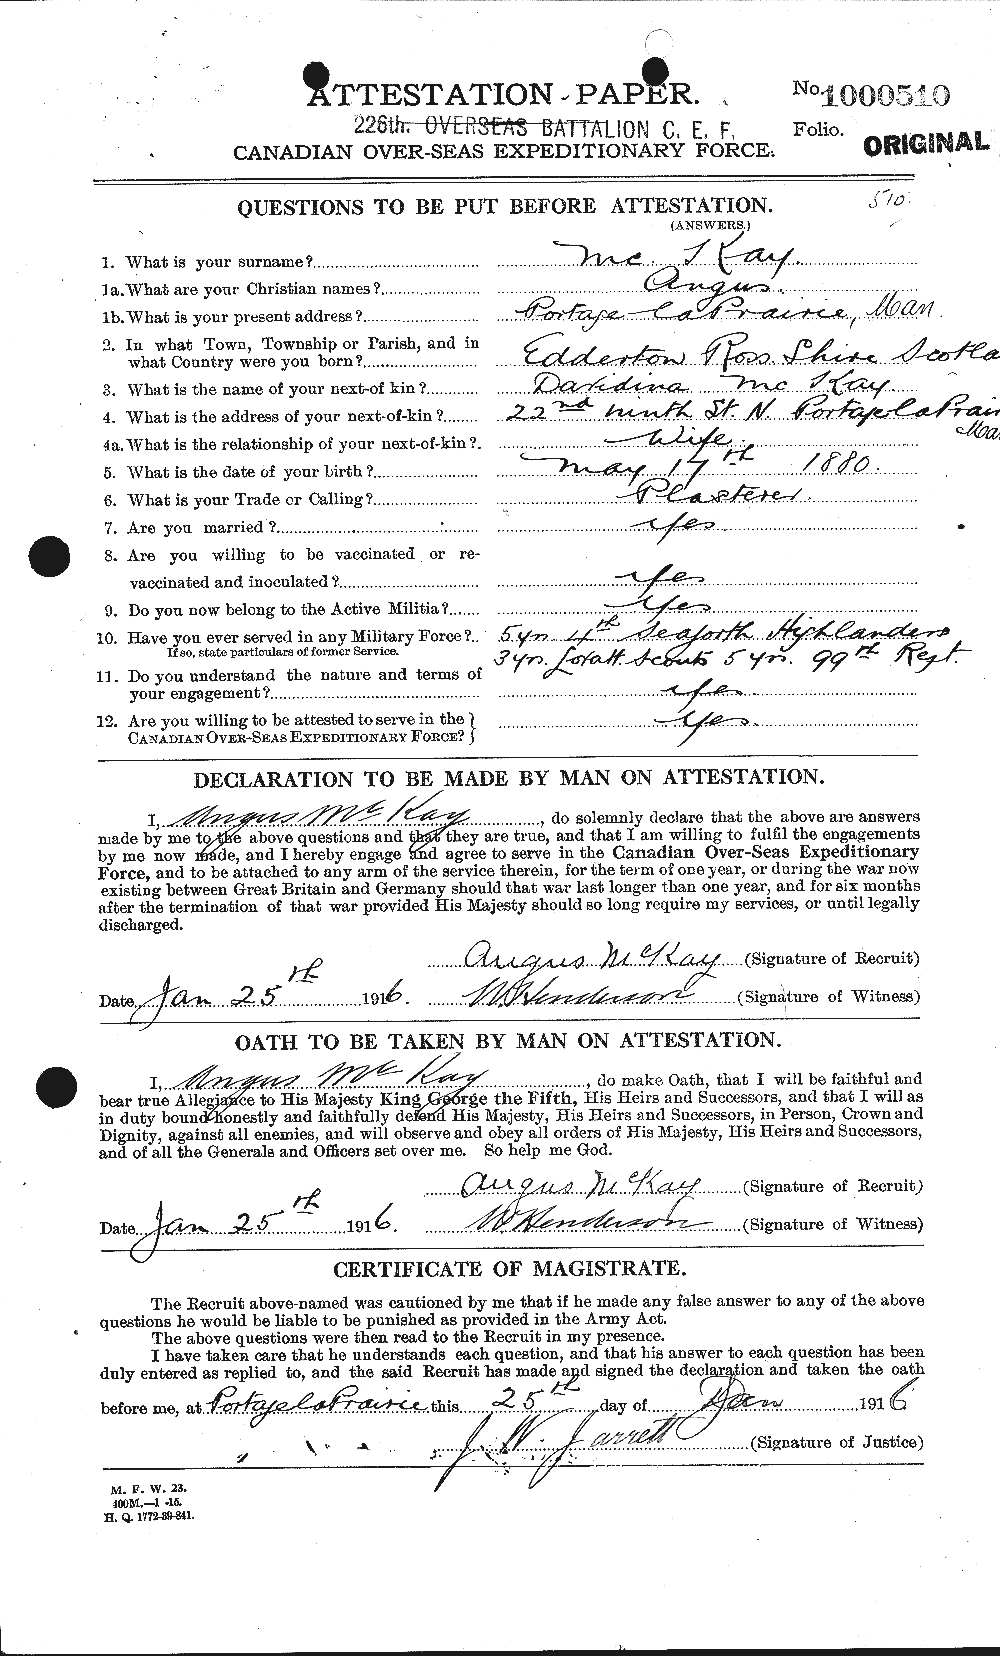 Personnel Records of the First World War - CEF 530995a